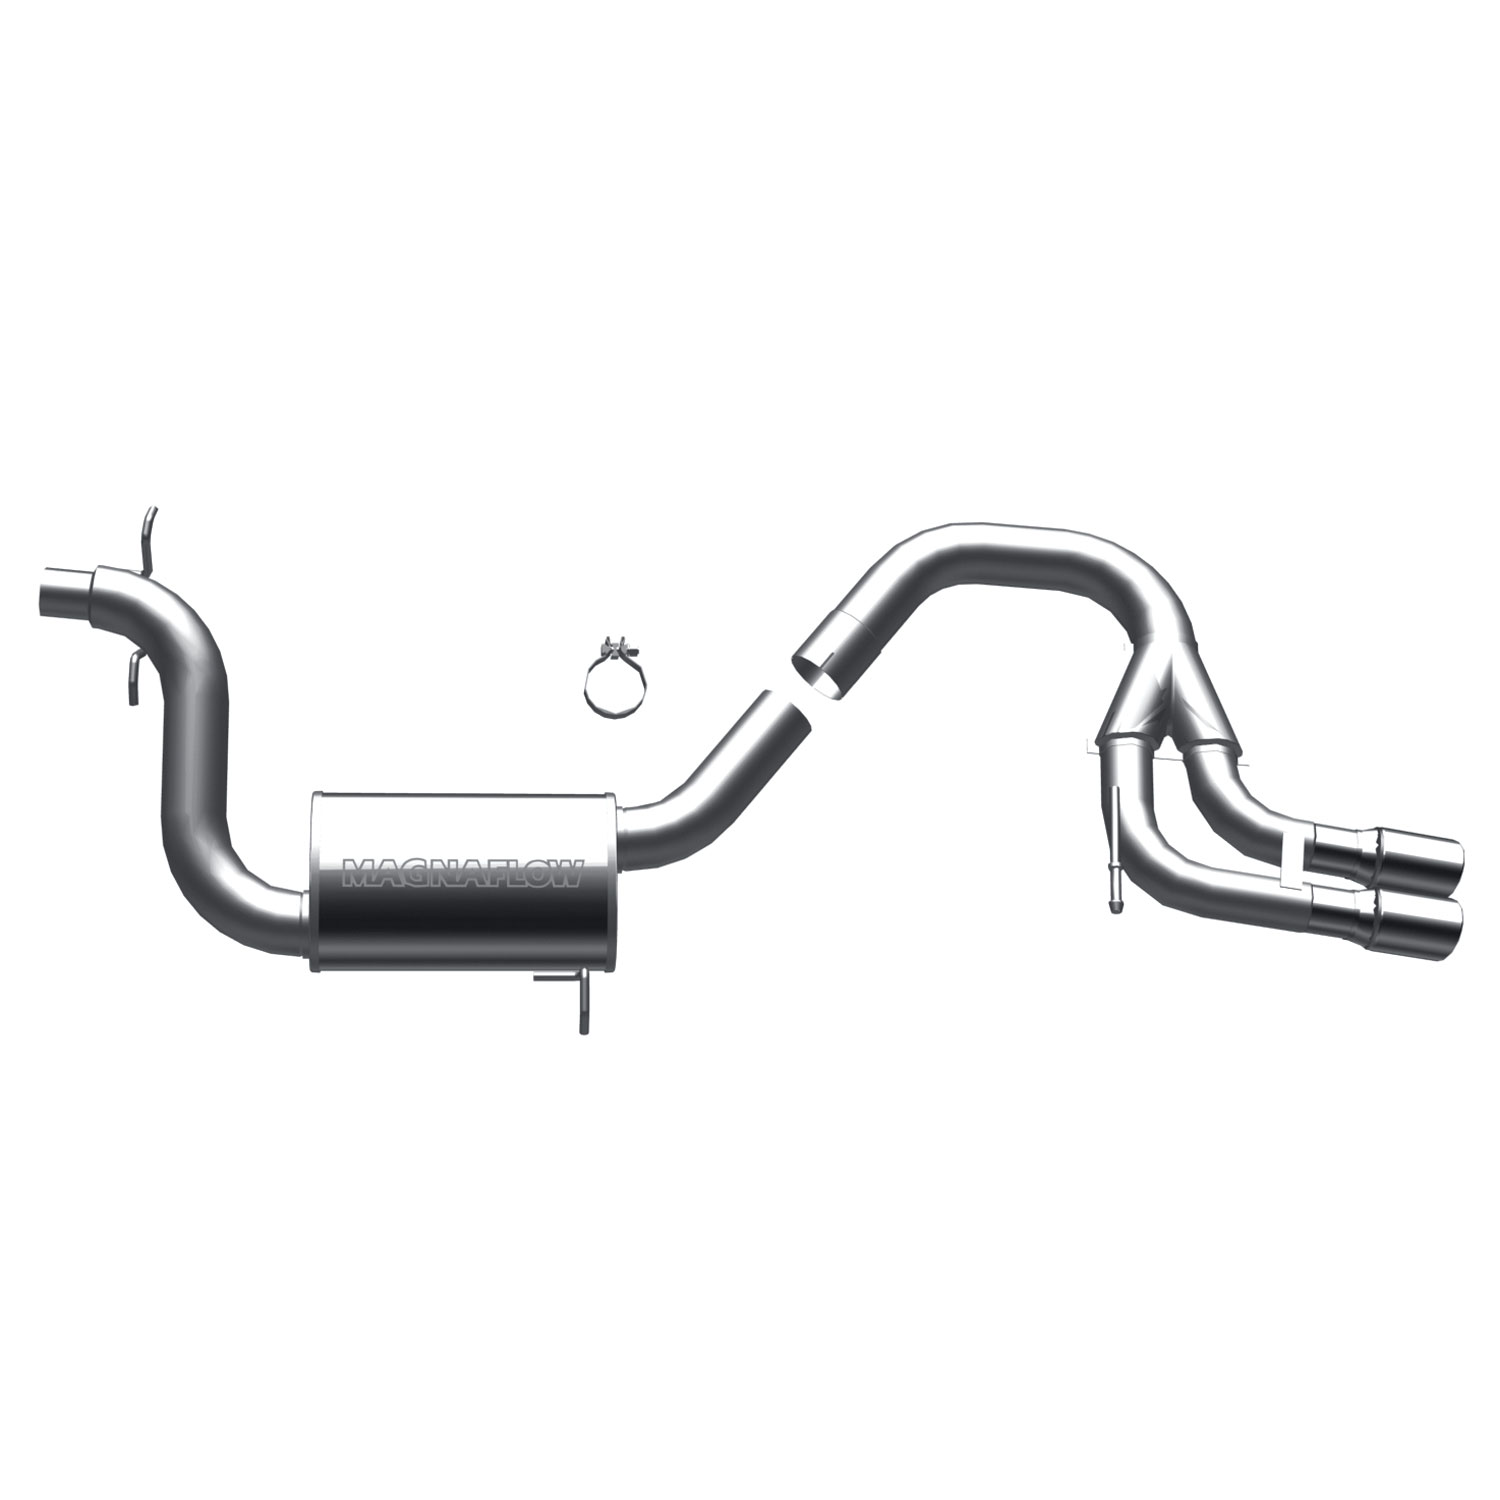 Touring Series Cat-Back Exhaust System 2006-13 Audi A3 2.0L L4